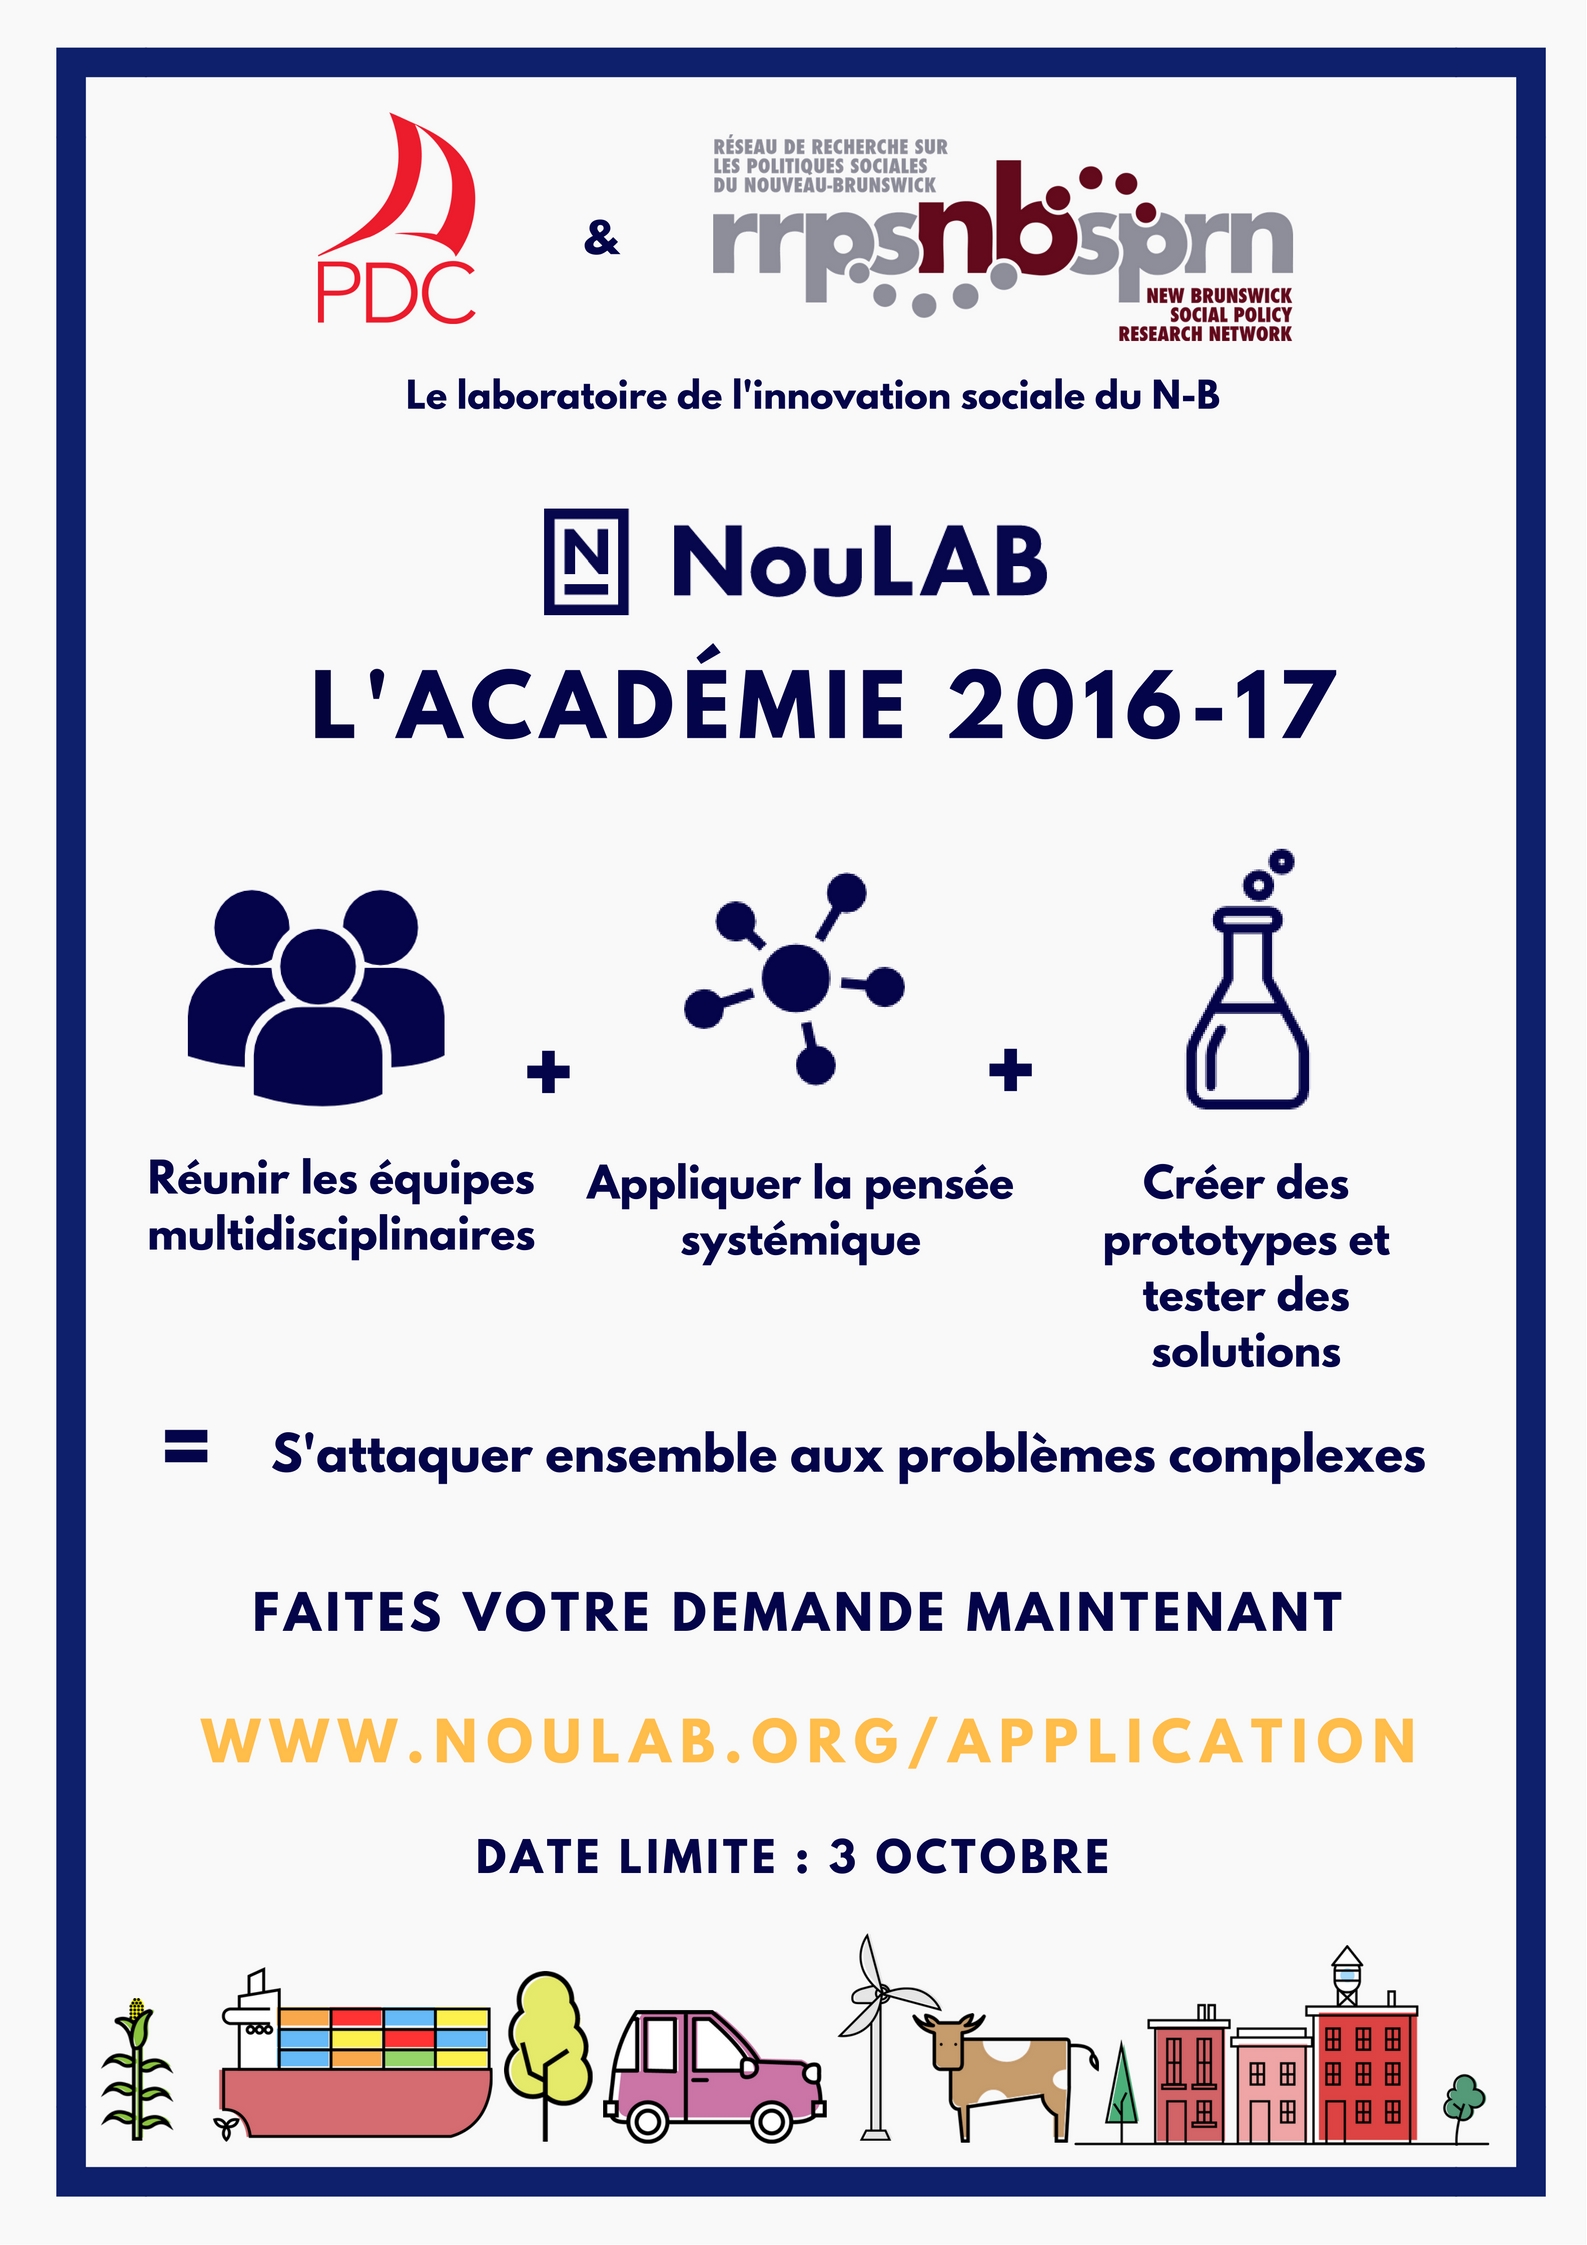 noulab-academy-poster-2016-17-french